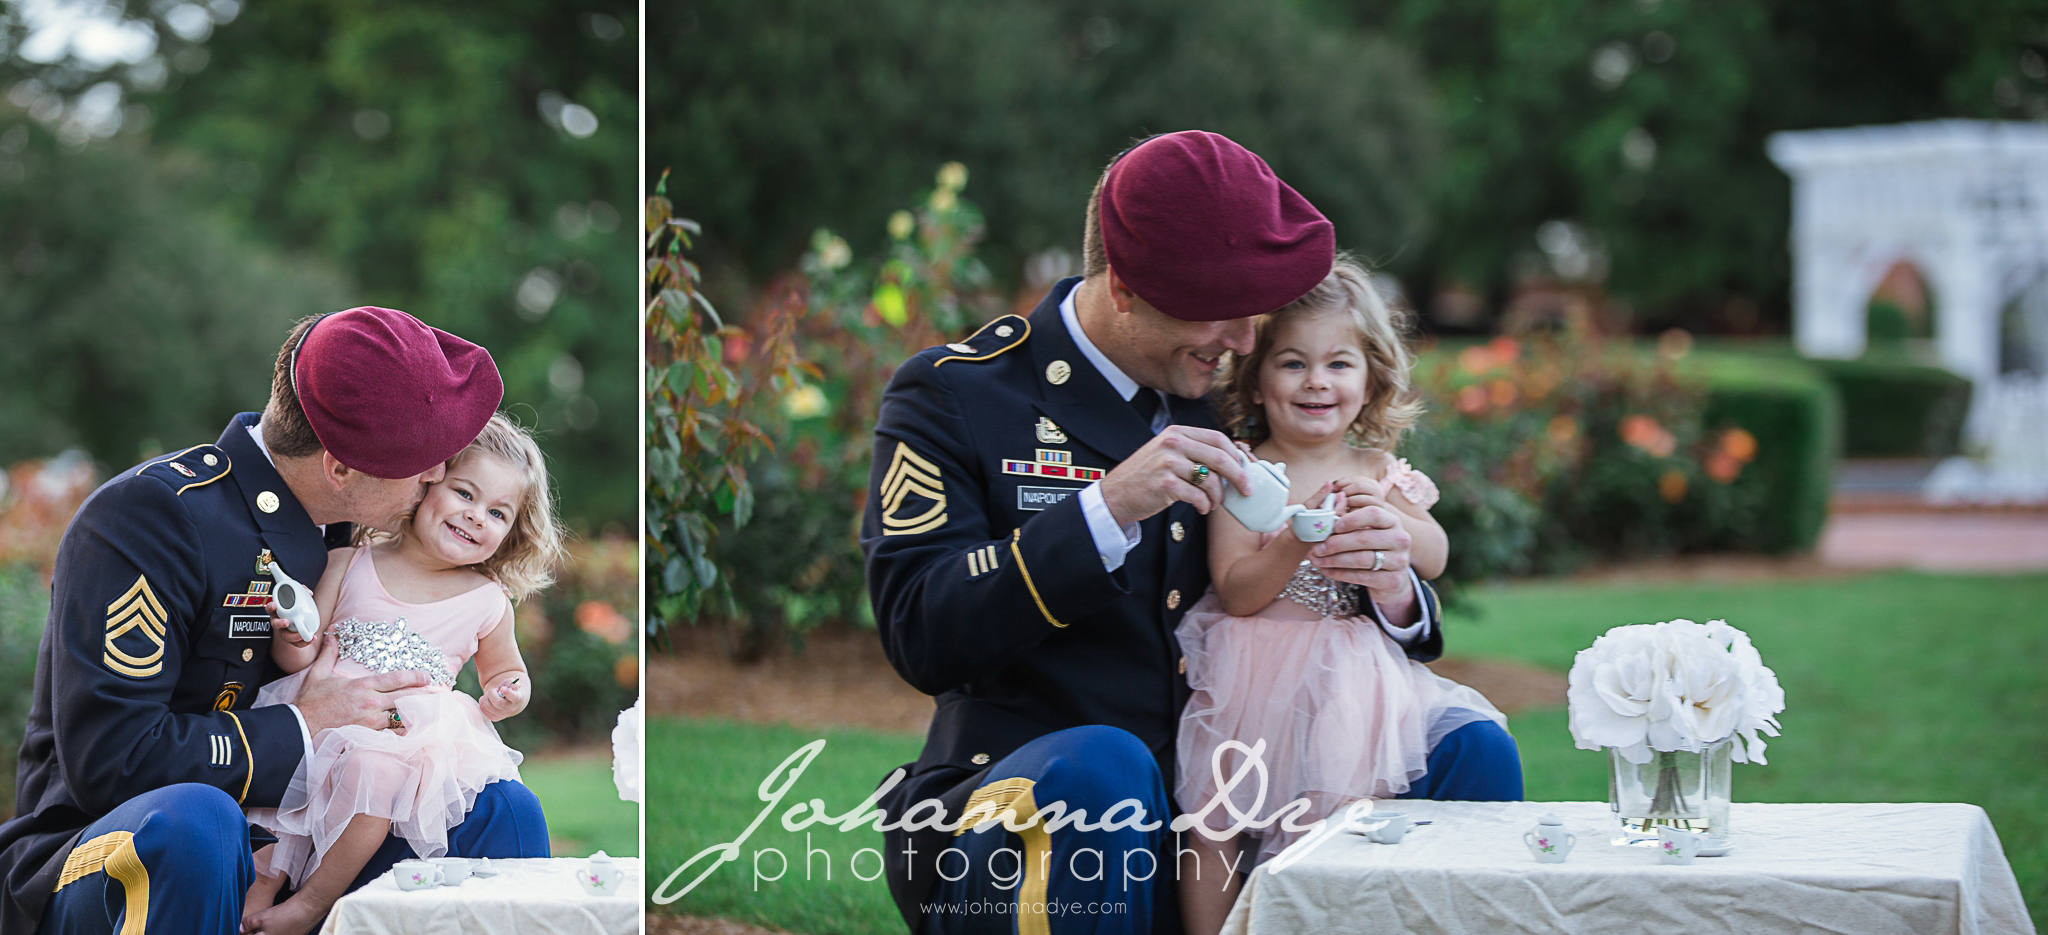 FTCC Rose Garden Military PhotographyJohanna Dye Photography is a Wedding and Portrait Photographer in Fayetteville and Fort Bragg, NC, servicing Asheville, Raleigh, Durham, Wilmington, NC